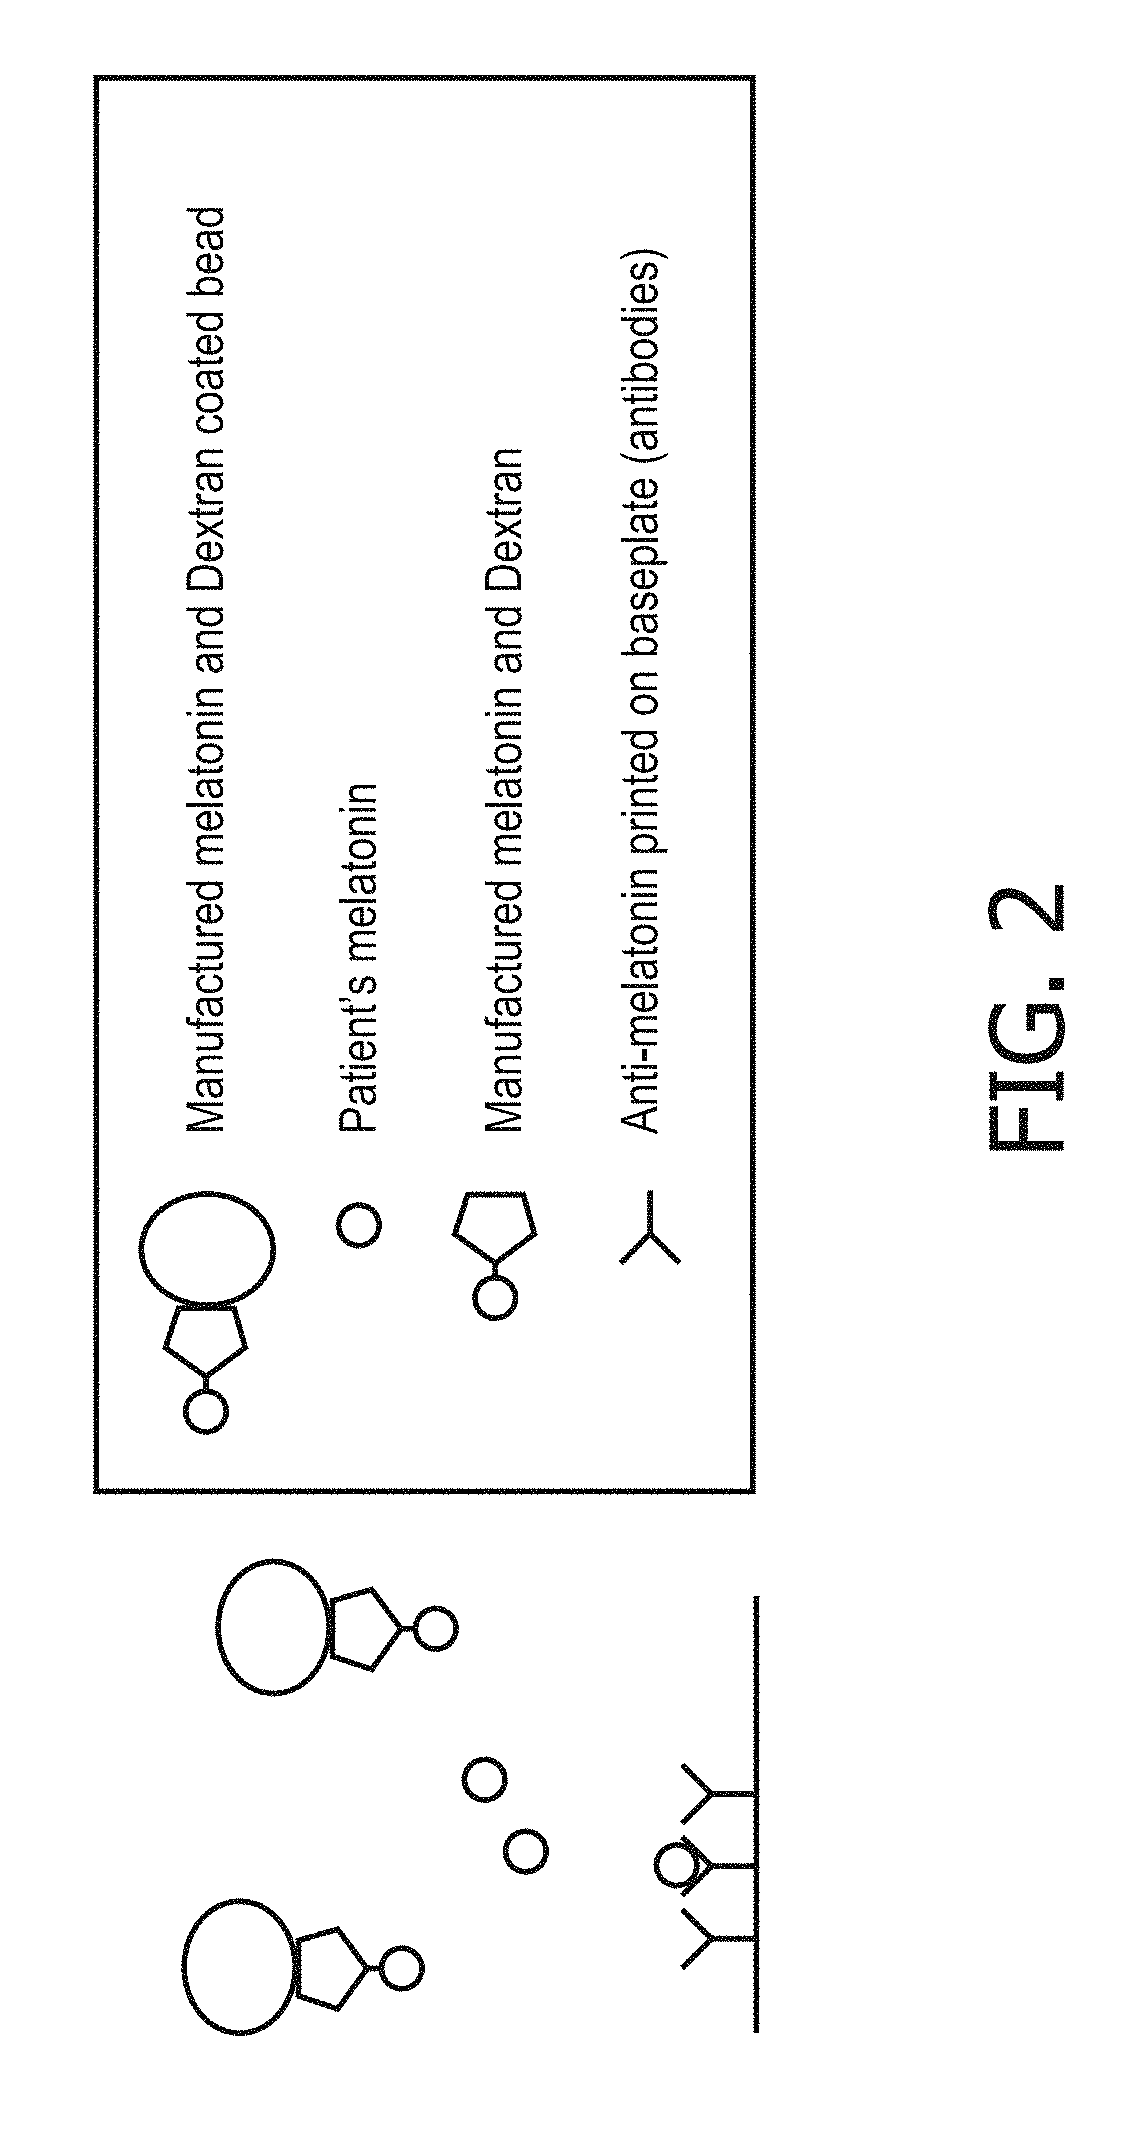 Determining onset of a sleep-related analyte